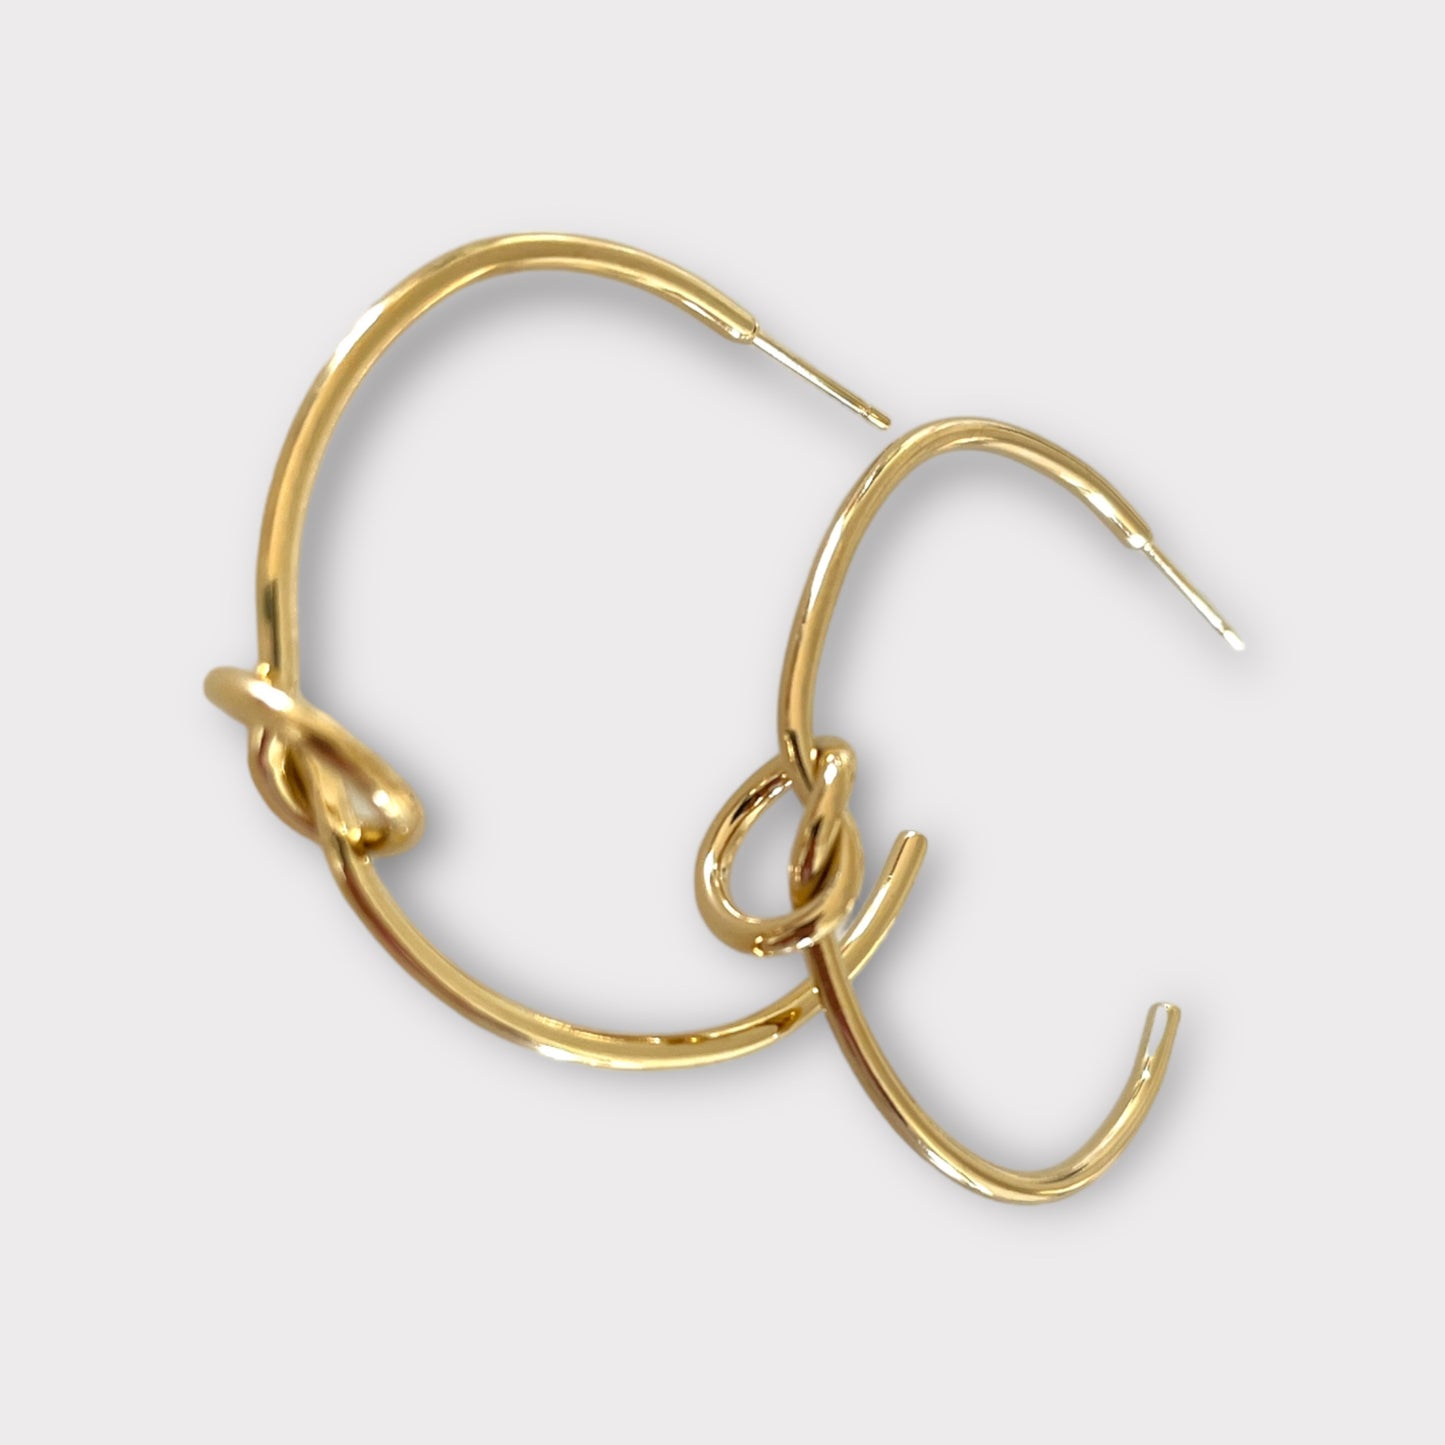 Knotted Two Inch Hoop Earrings